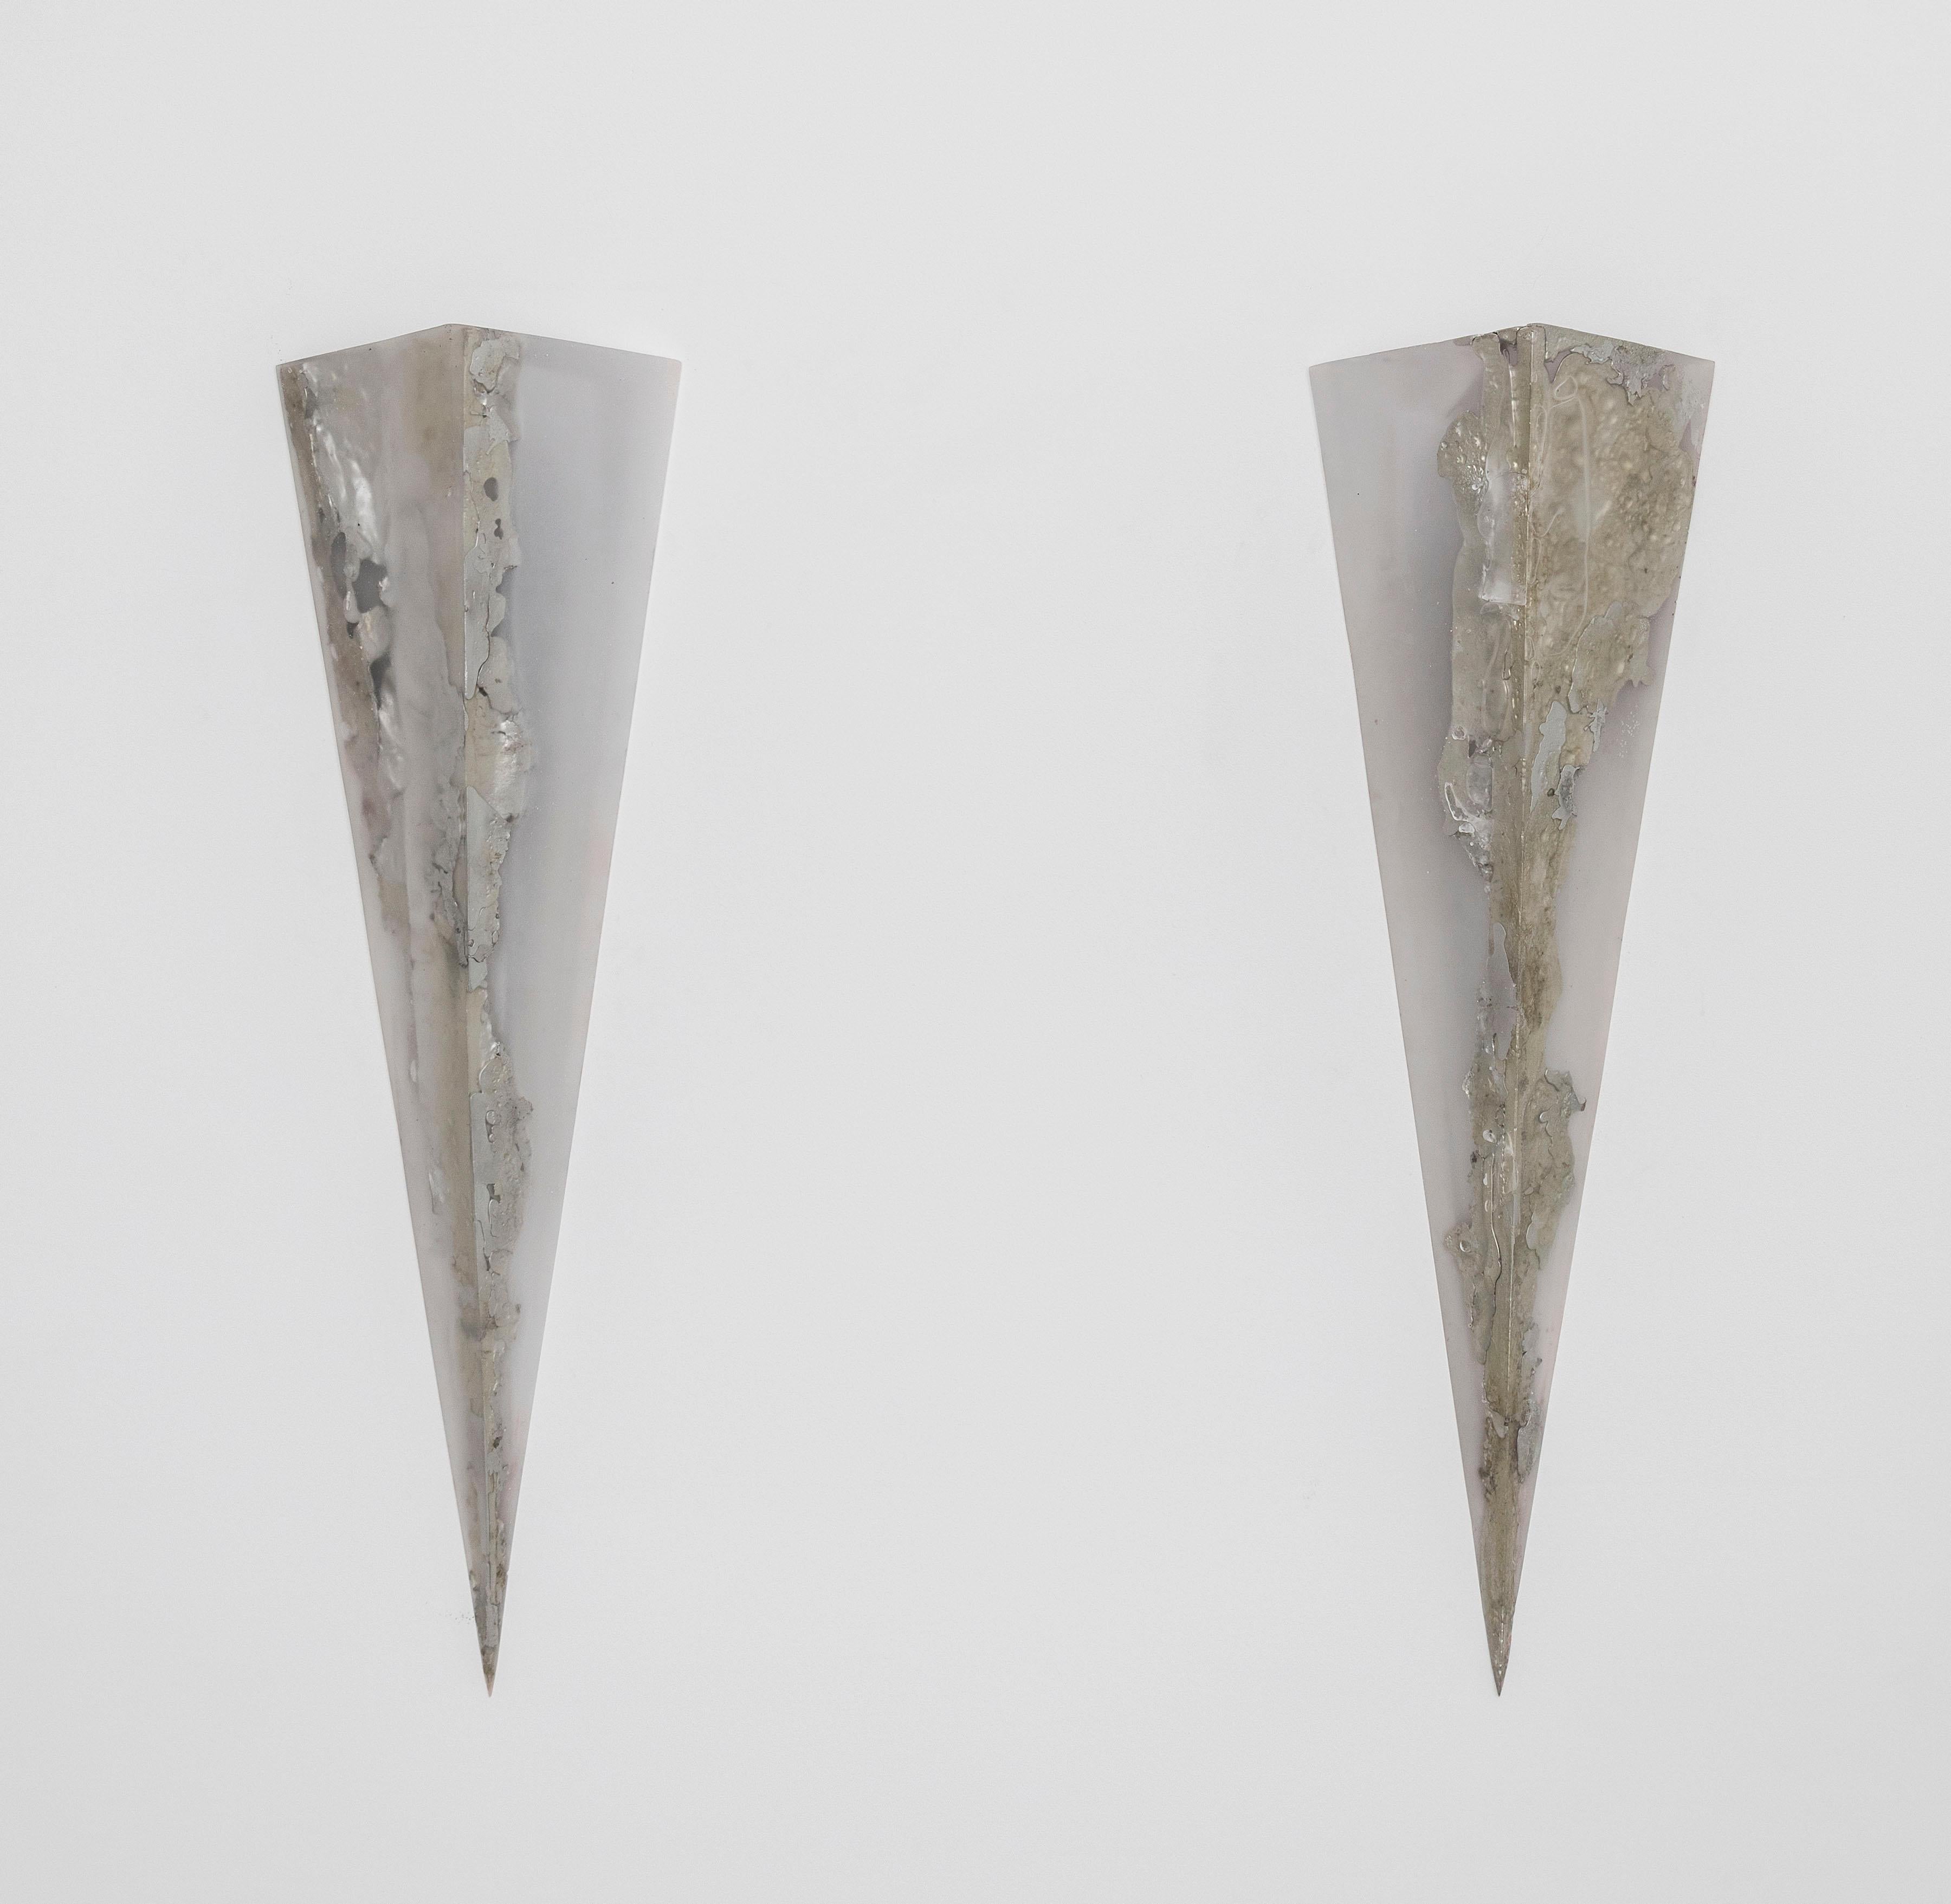 Cast in clear resin and melted pewter, these sconces are made by hand and customizable upon request.